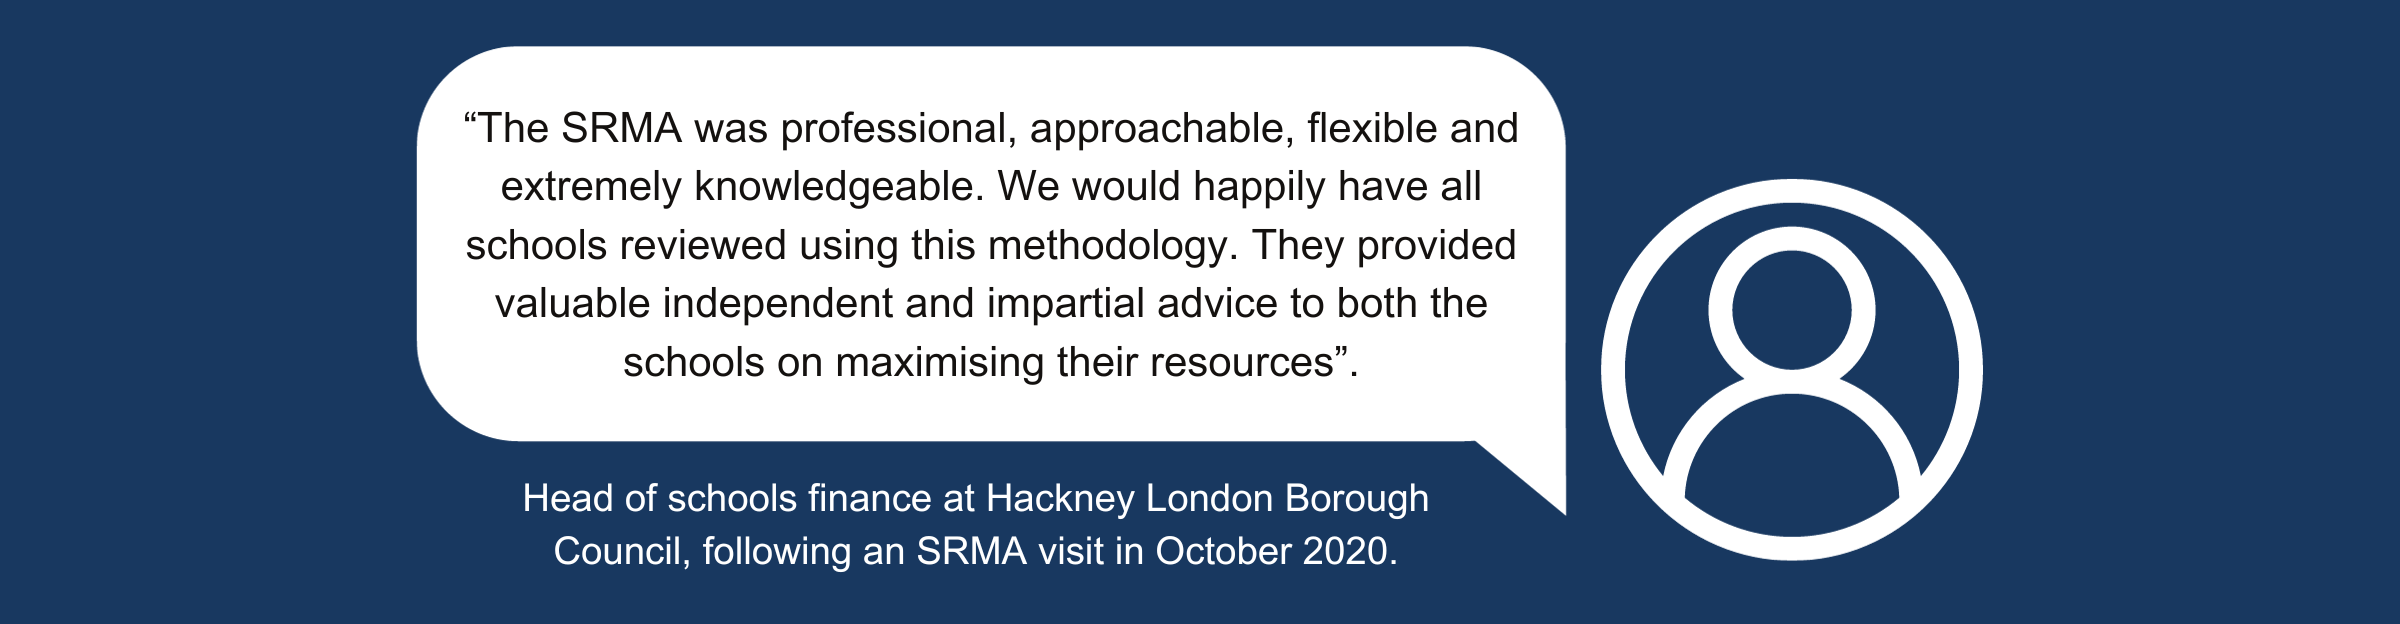 A quote from a head of schools finance at Hackney London Borough Council, following an SRMA in October 2020. The quote reads: “The SRMA was professional, approachable, flexible, and extremely knowledgeable. We would happily have all schools reviewed using this methodology. They provided valuable independent and impartial advice to both the schools on maximising their resources.”